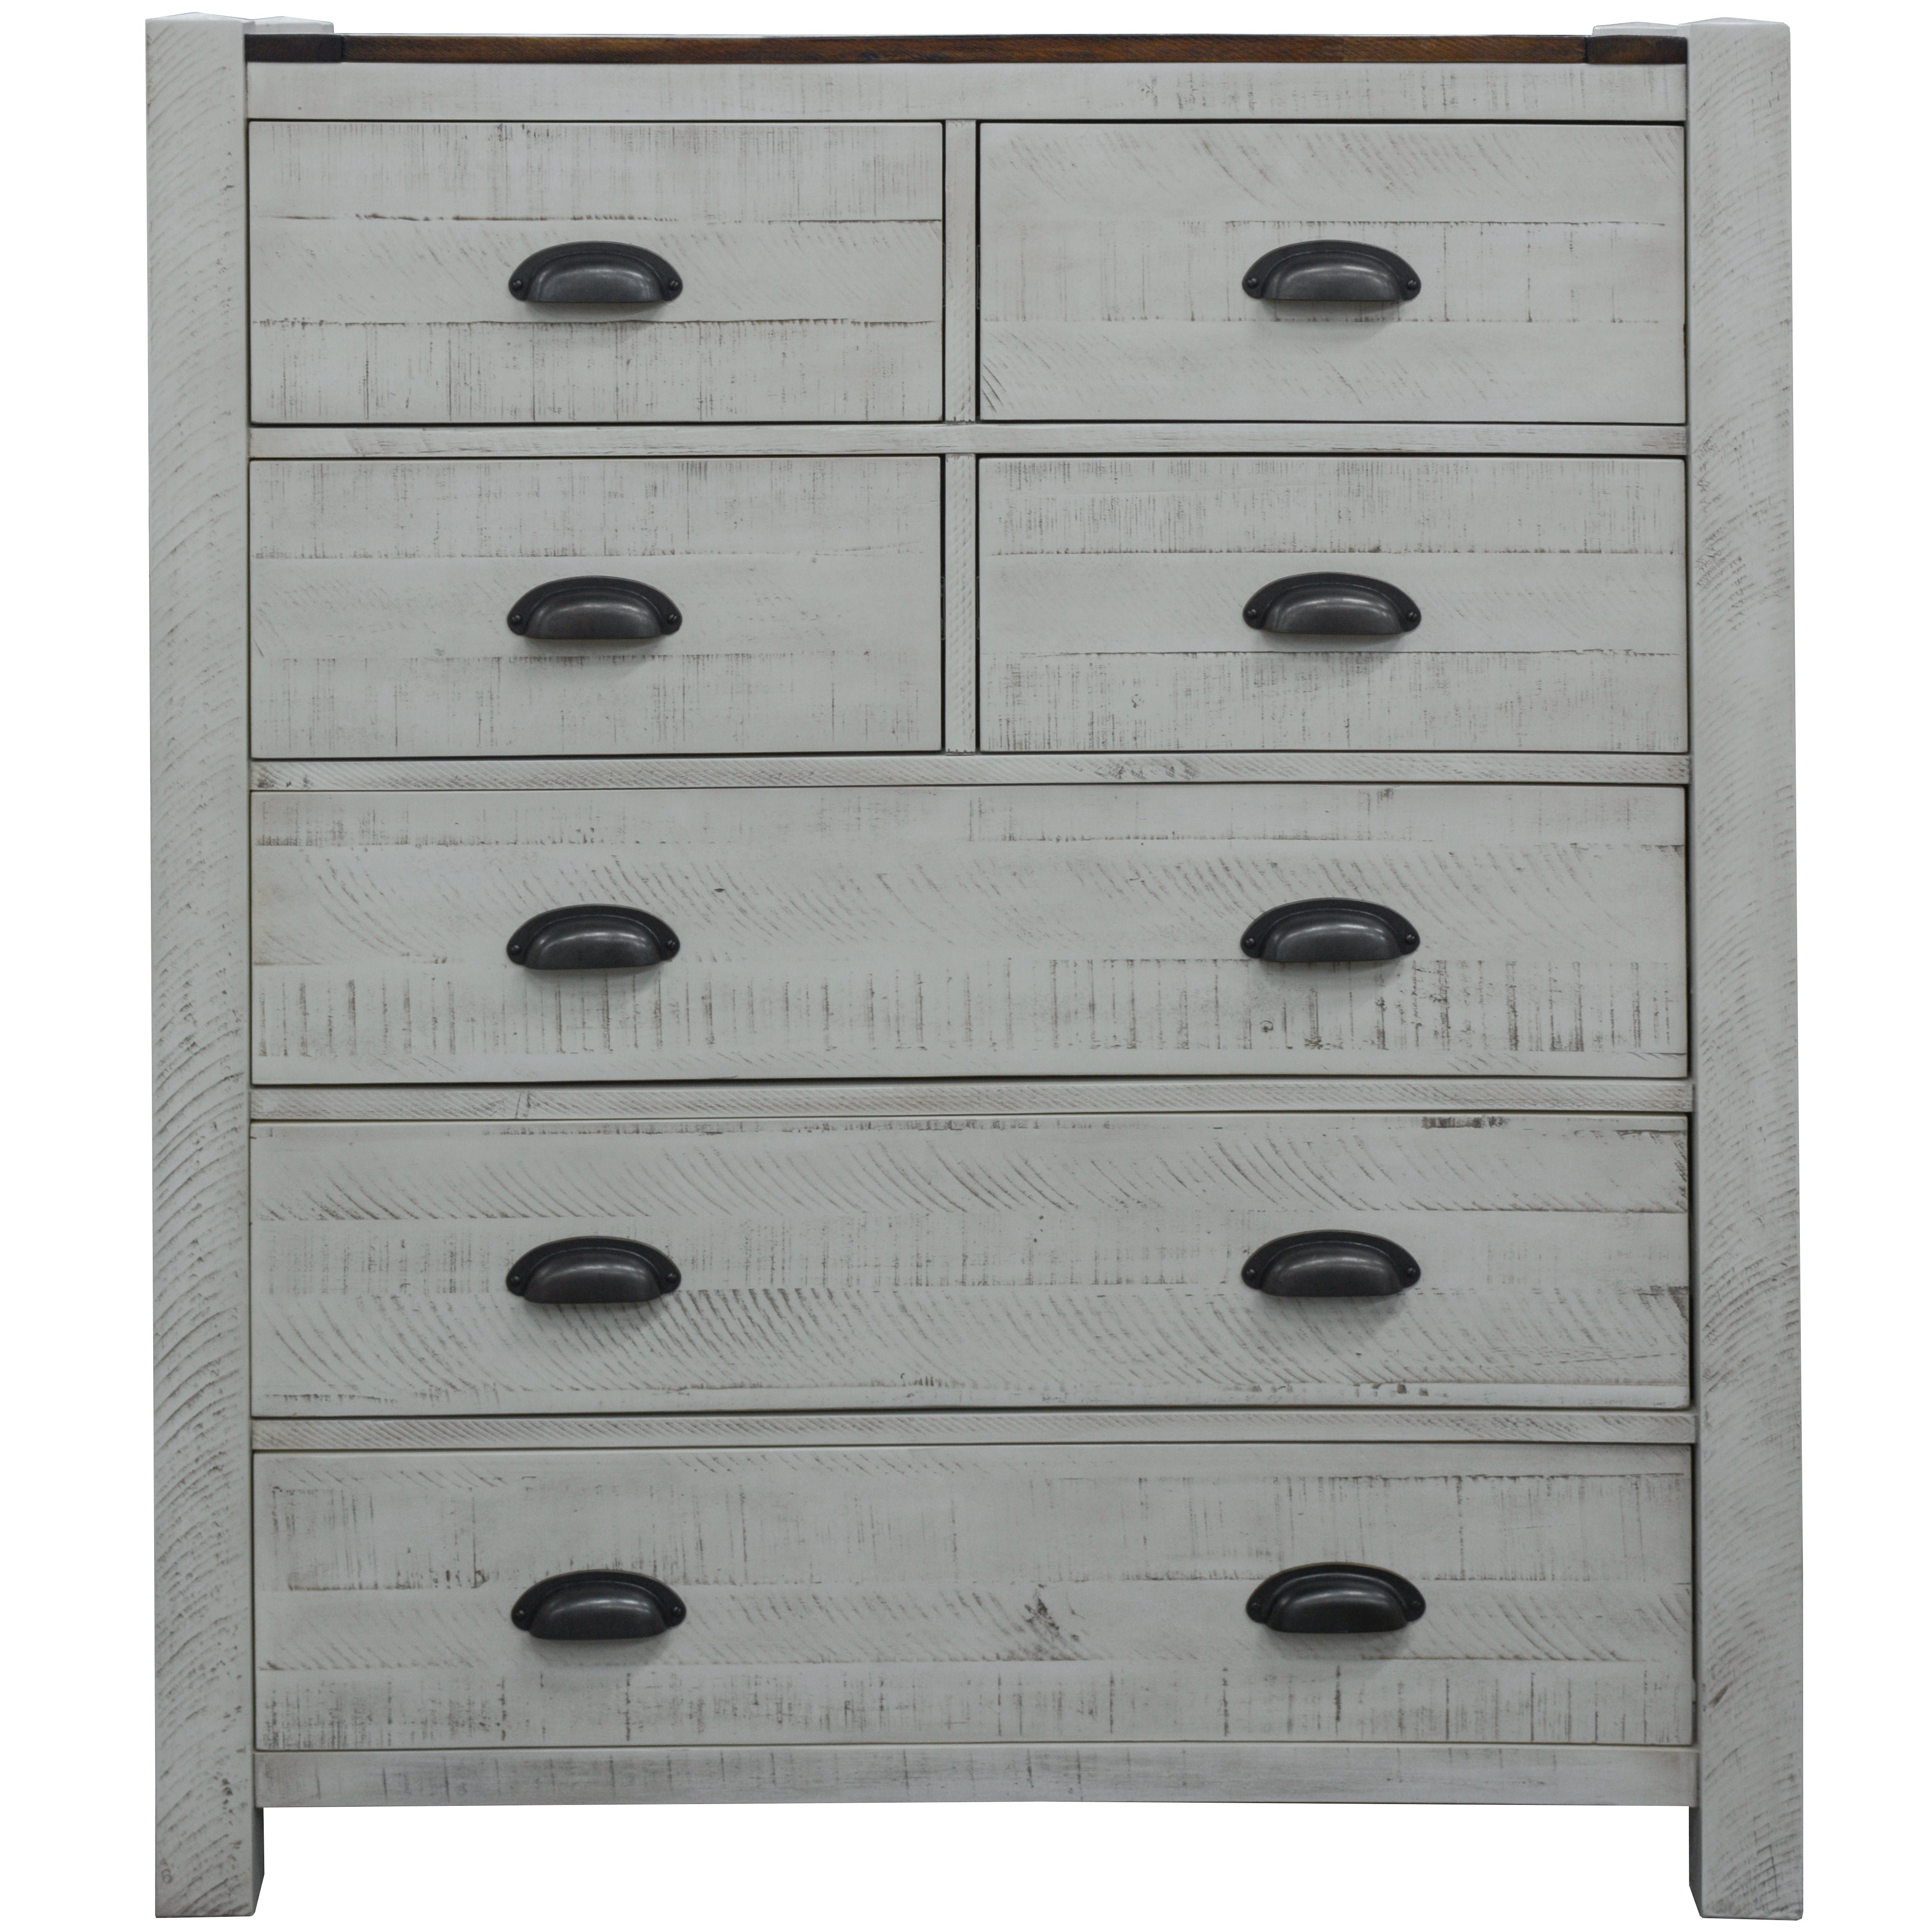 Erica Tallboy 7 Chest of Drawers Solid Acacia Timber Wood Cabinet Brown White